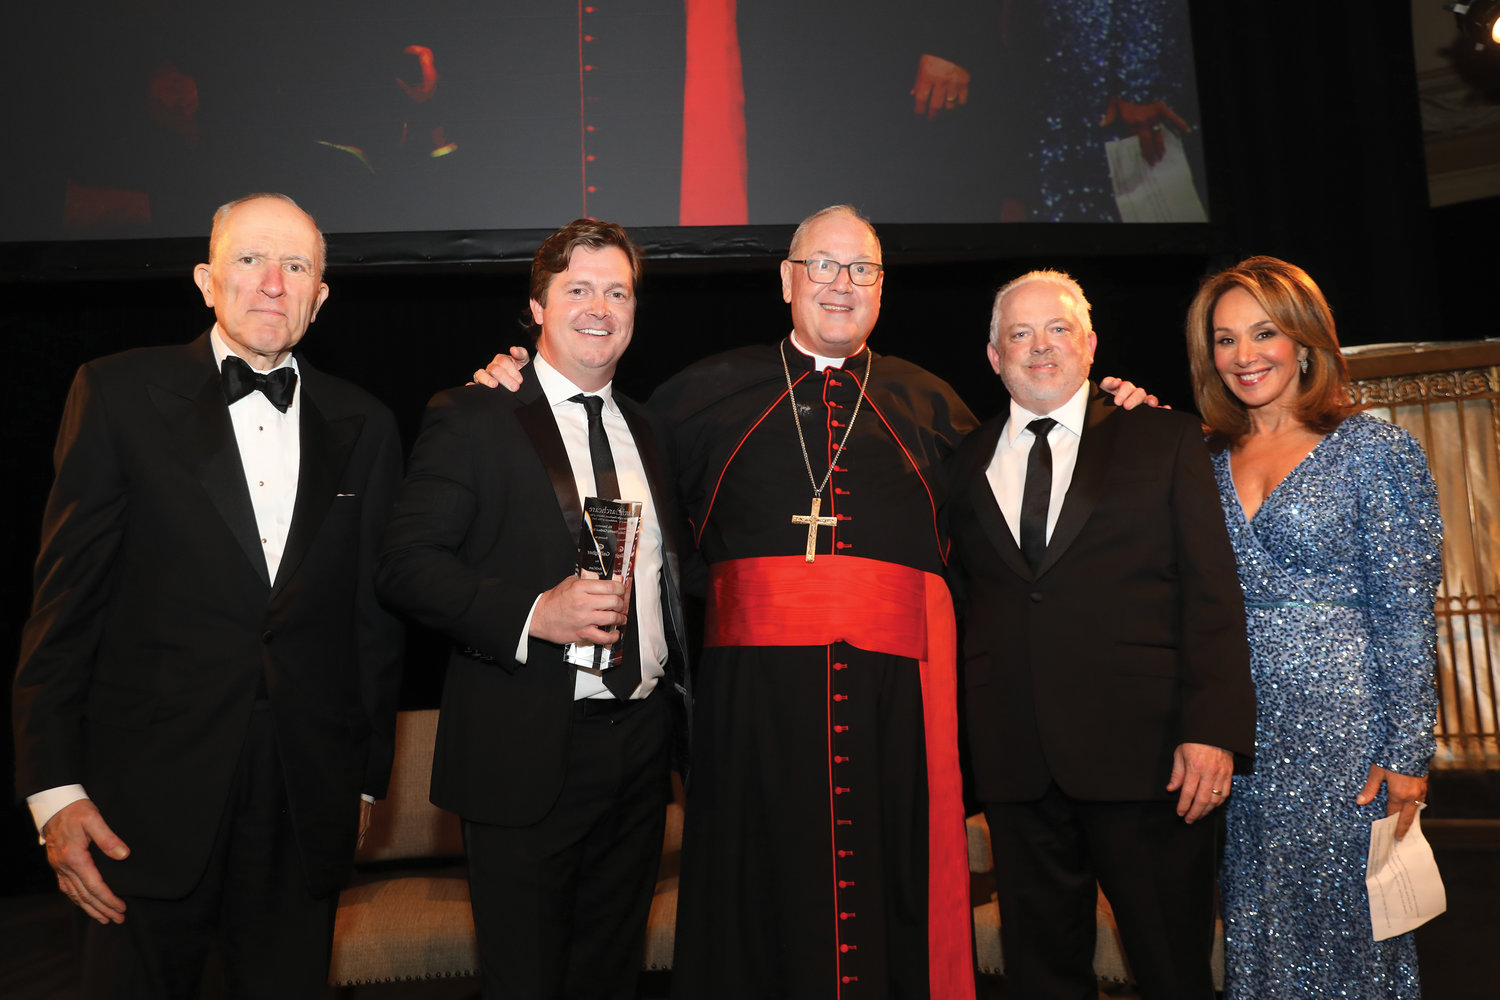 At the ArchCare Gala at Gotham Hall in Manhattan Oct. 27, are, from left: Francis Serbaroli, chairman, ArchCare board of trustees; Brendan Gallagher, president, New York, Gallagher; Cardinal Dolan; Scott LaRue, president and CEO of ArchCare; and Rosanna Scotto, Fox 5 New York. Gallagher and 10-time U.S. Olympic swimming medalist Katie Ledecky, who participated via video, were the honorees. The gala raised a record $1.9 million for ArchCare, the archdiocesan health care system that cares daily for more than 9,000 seniors, the poor and persons with special needs.